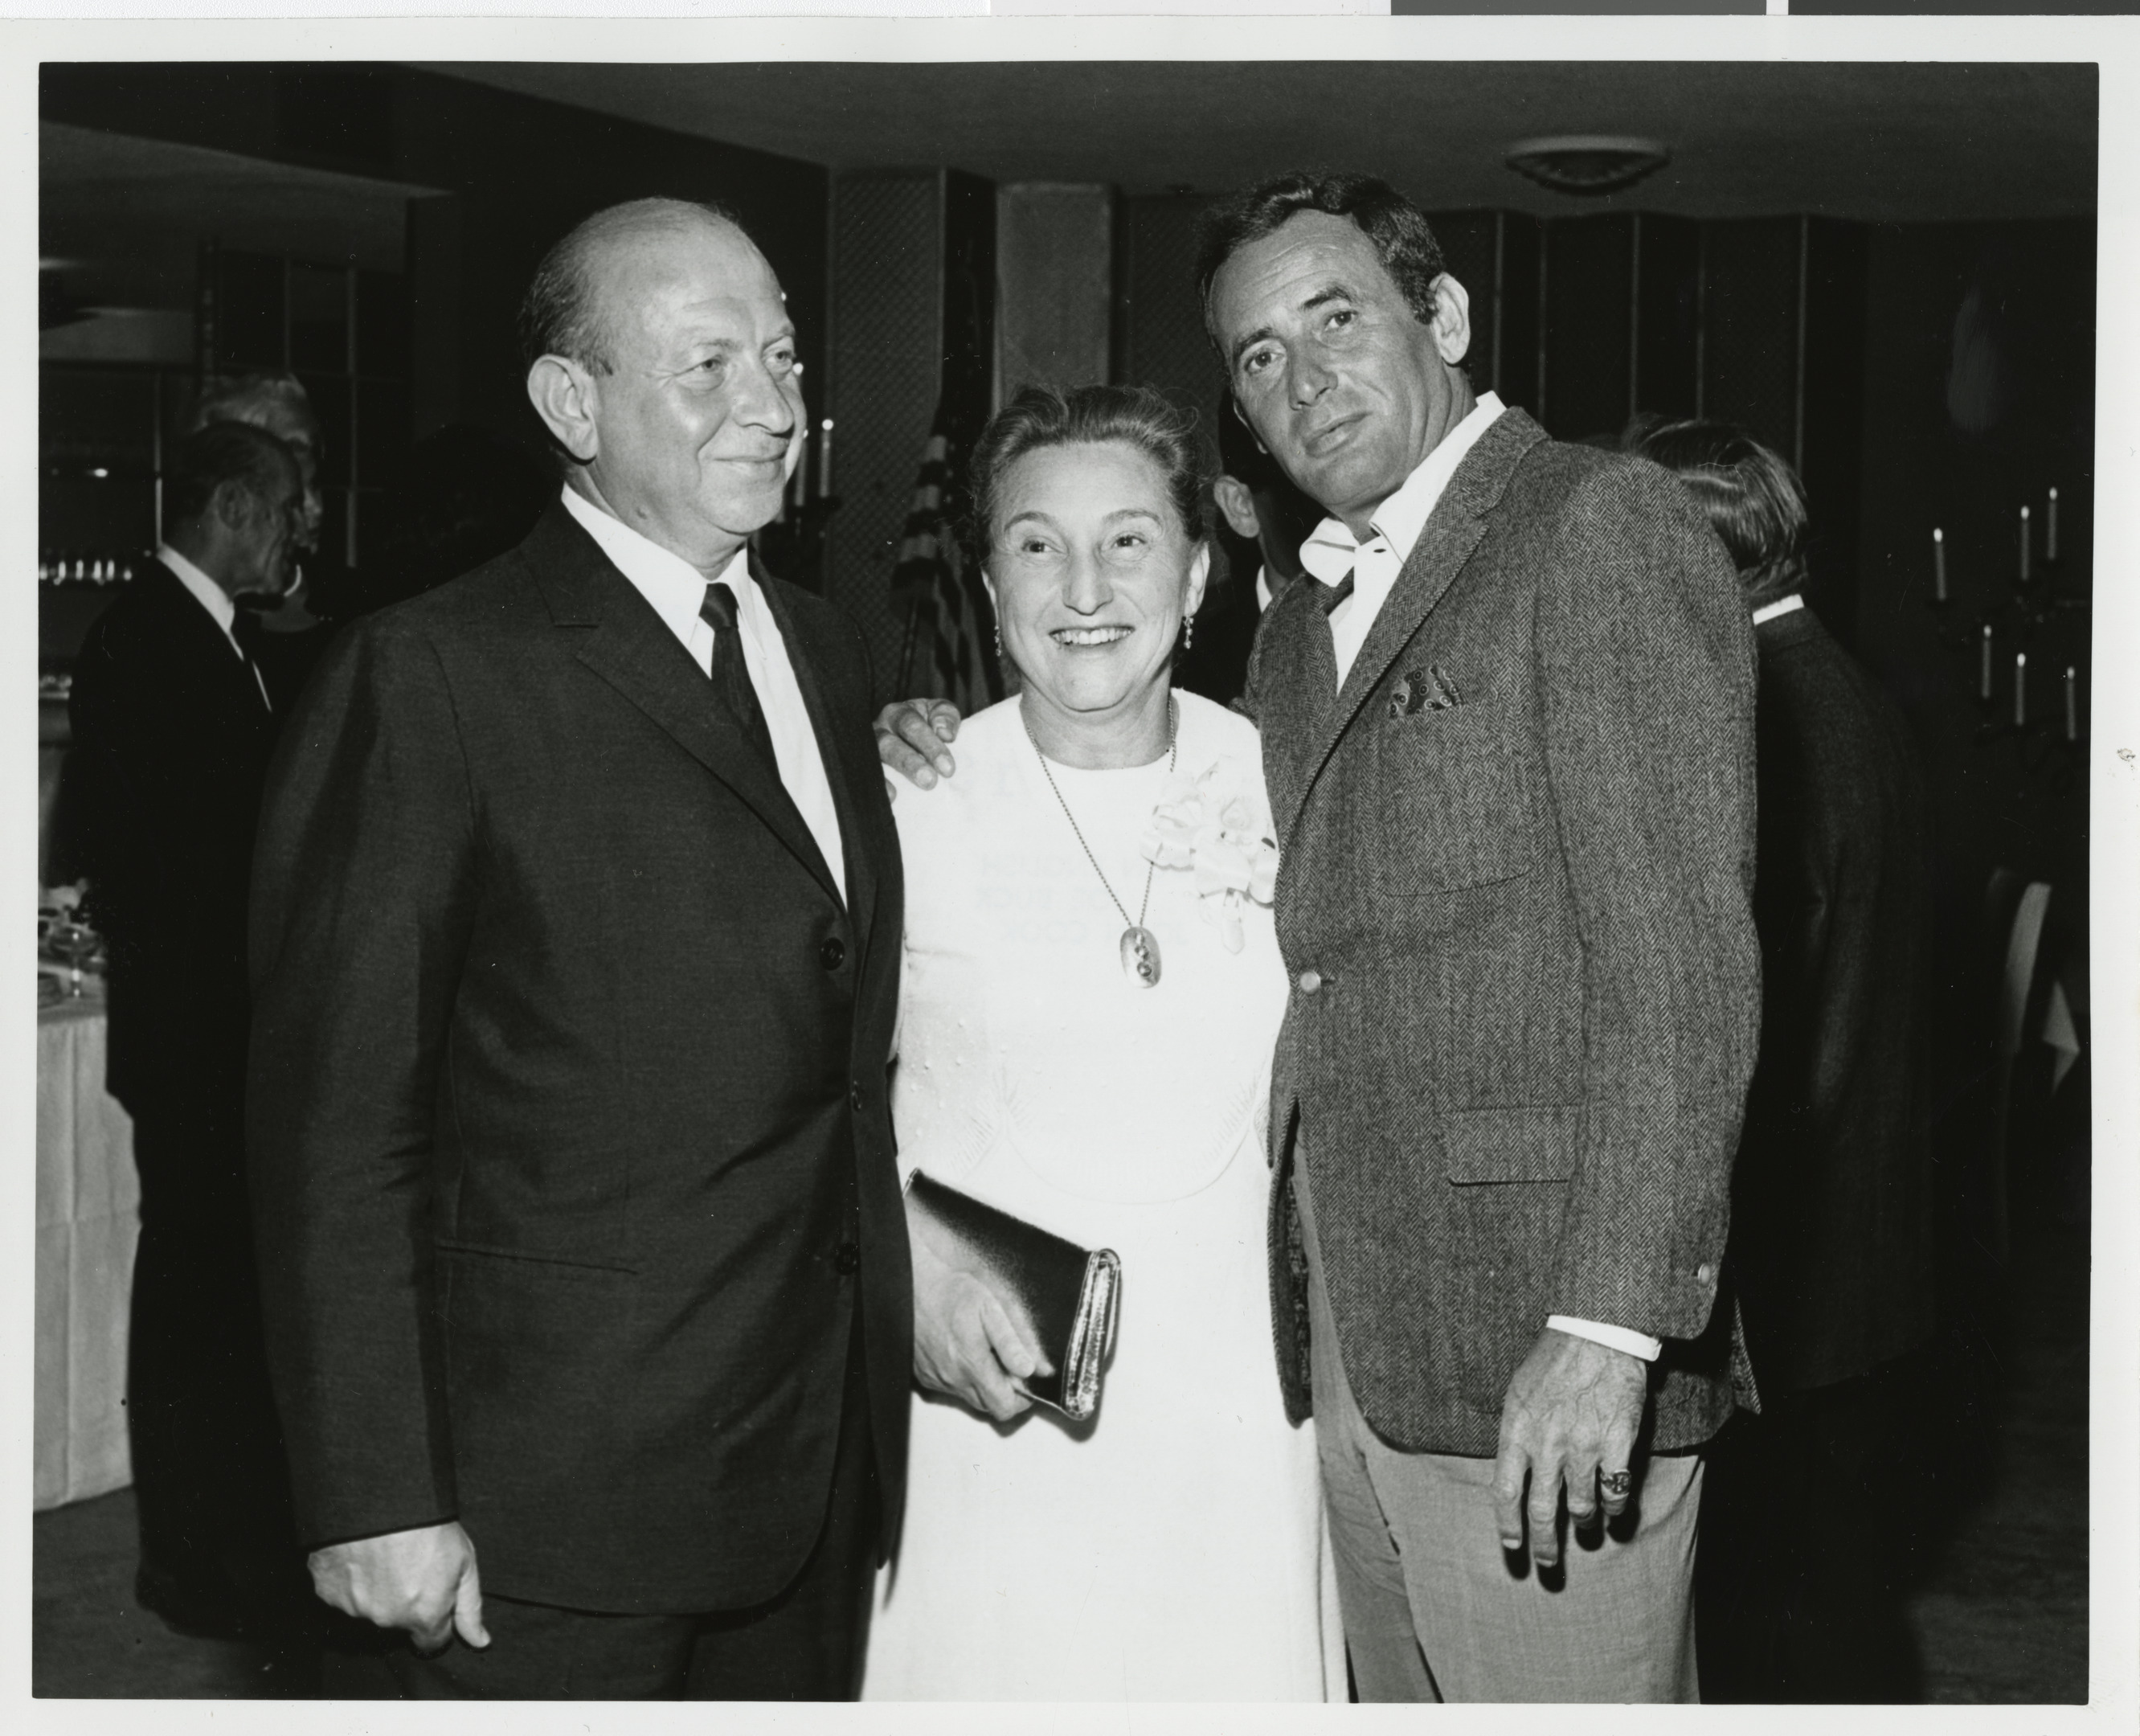 Photograph of Dr. and Mrs. Kalman Mann with unknown